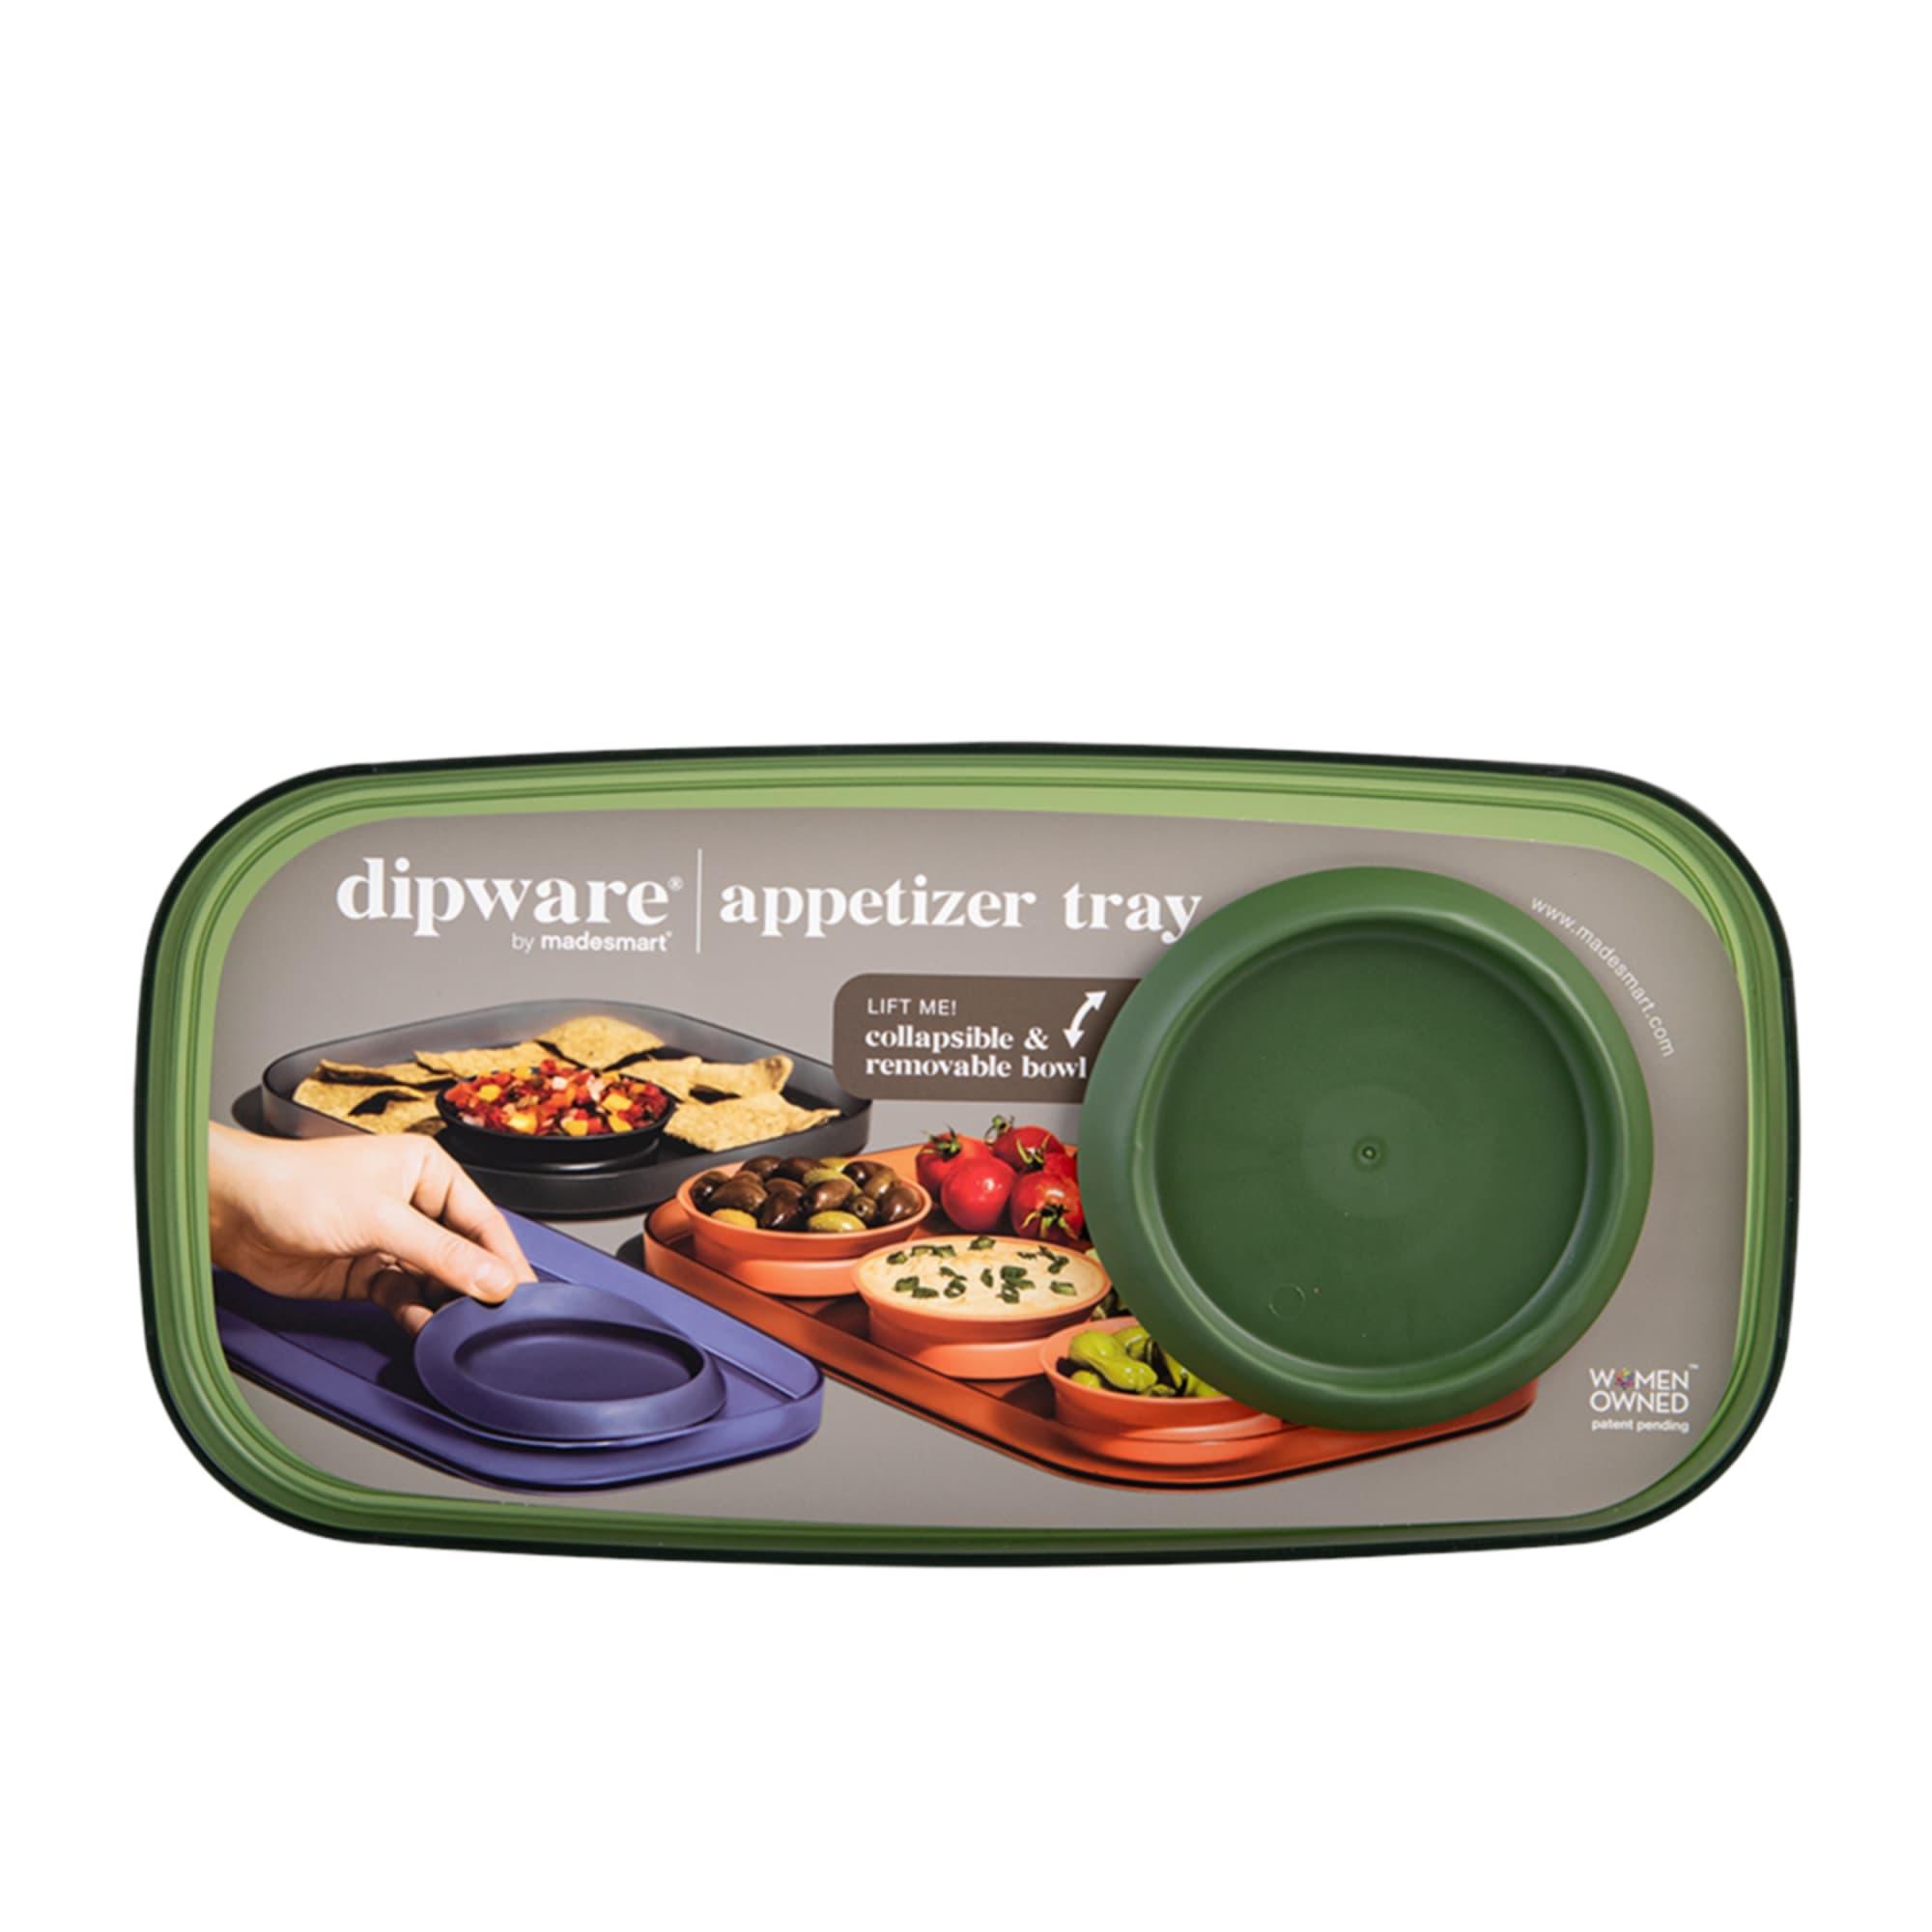 Madesmart Dipware Appetizer Tray with Bowl Olive Green Image 3